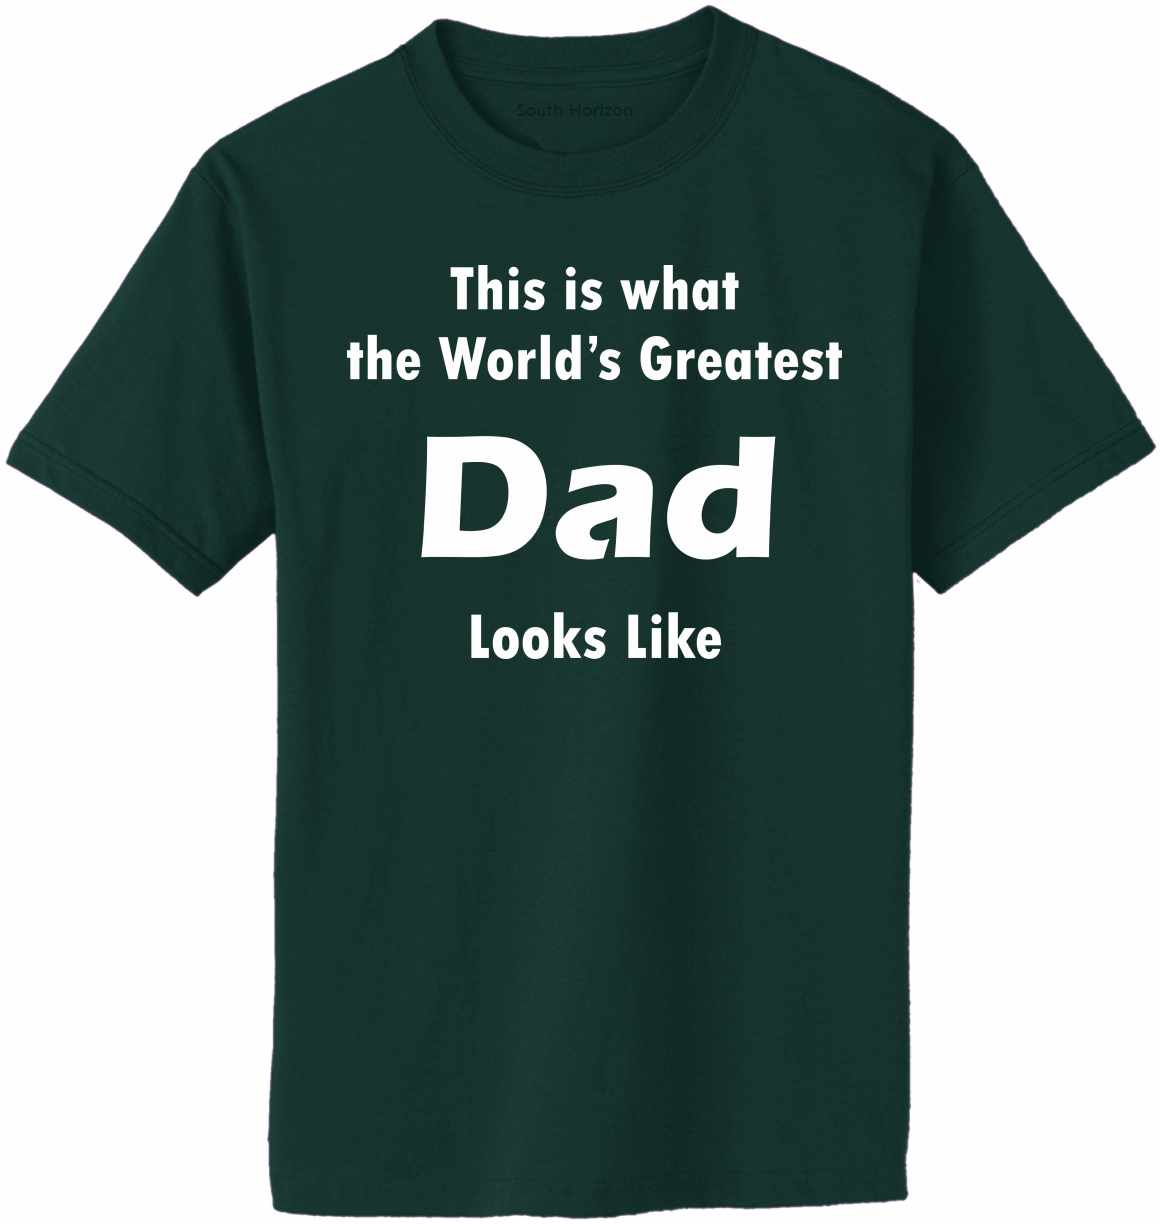 This is what the World's Greatest Dad Looks Like Adult T-Shirt